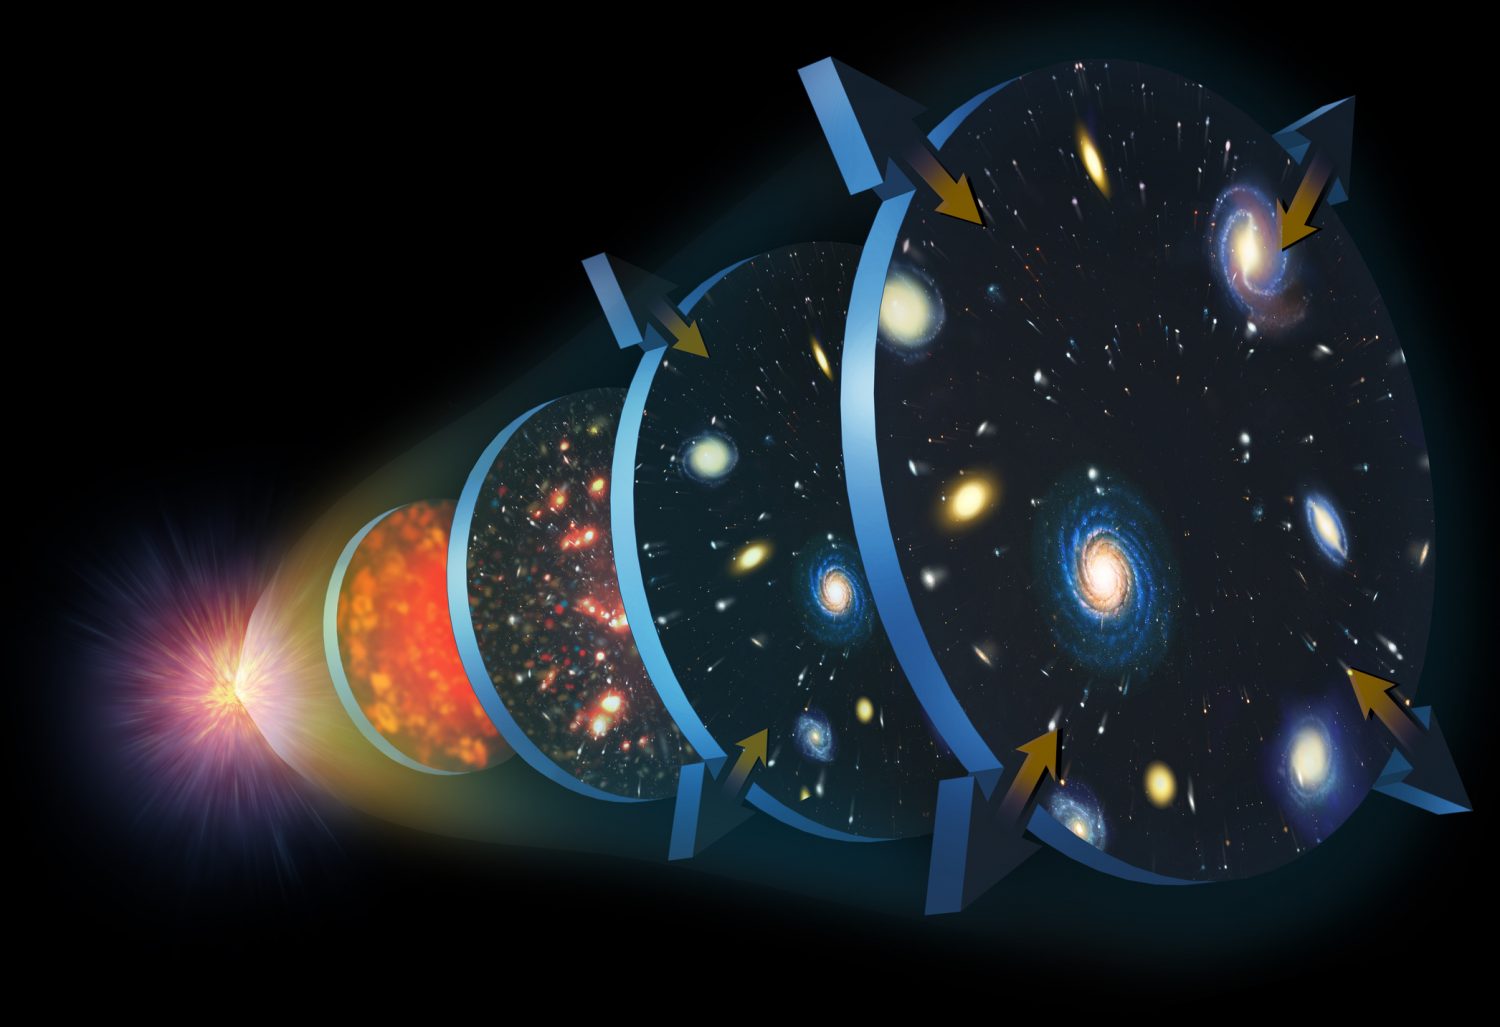 The early Universe expanded faster than light